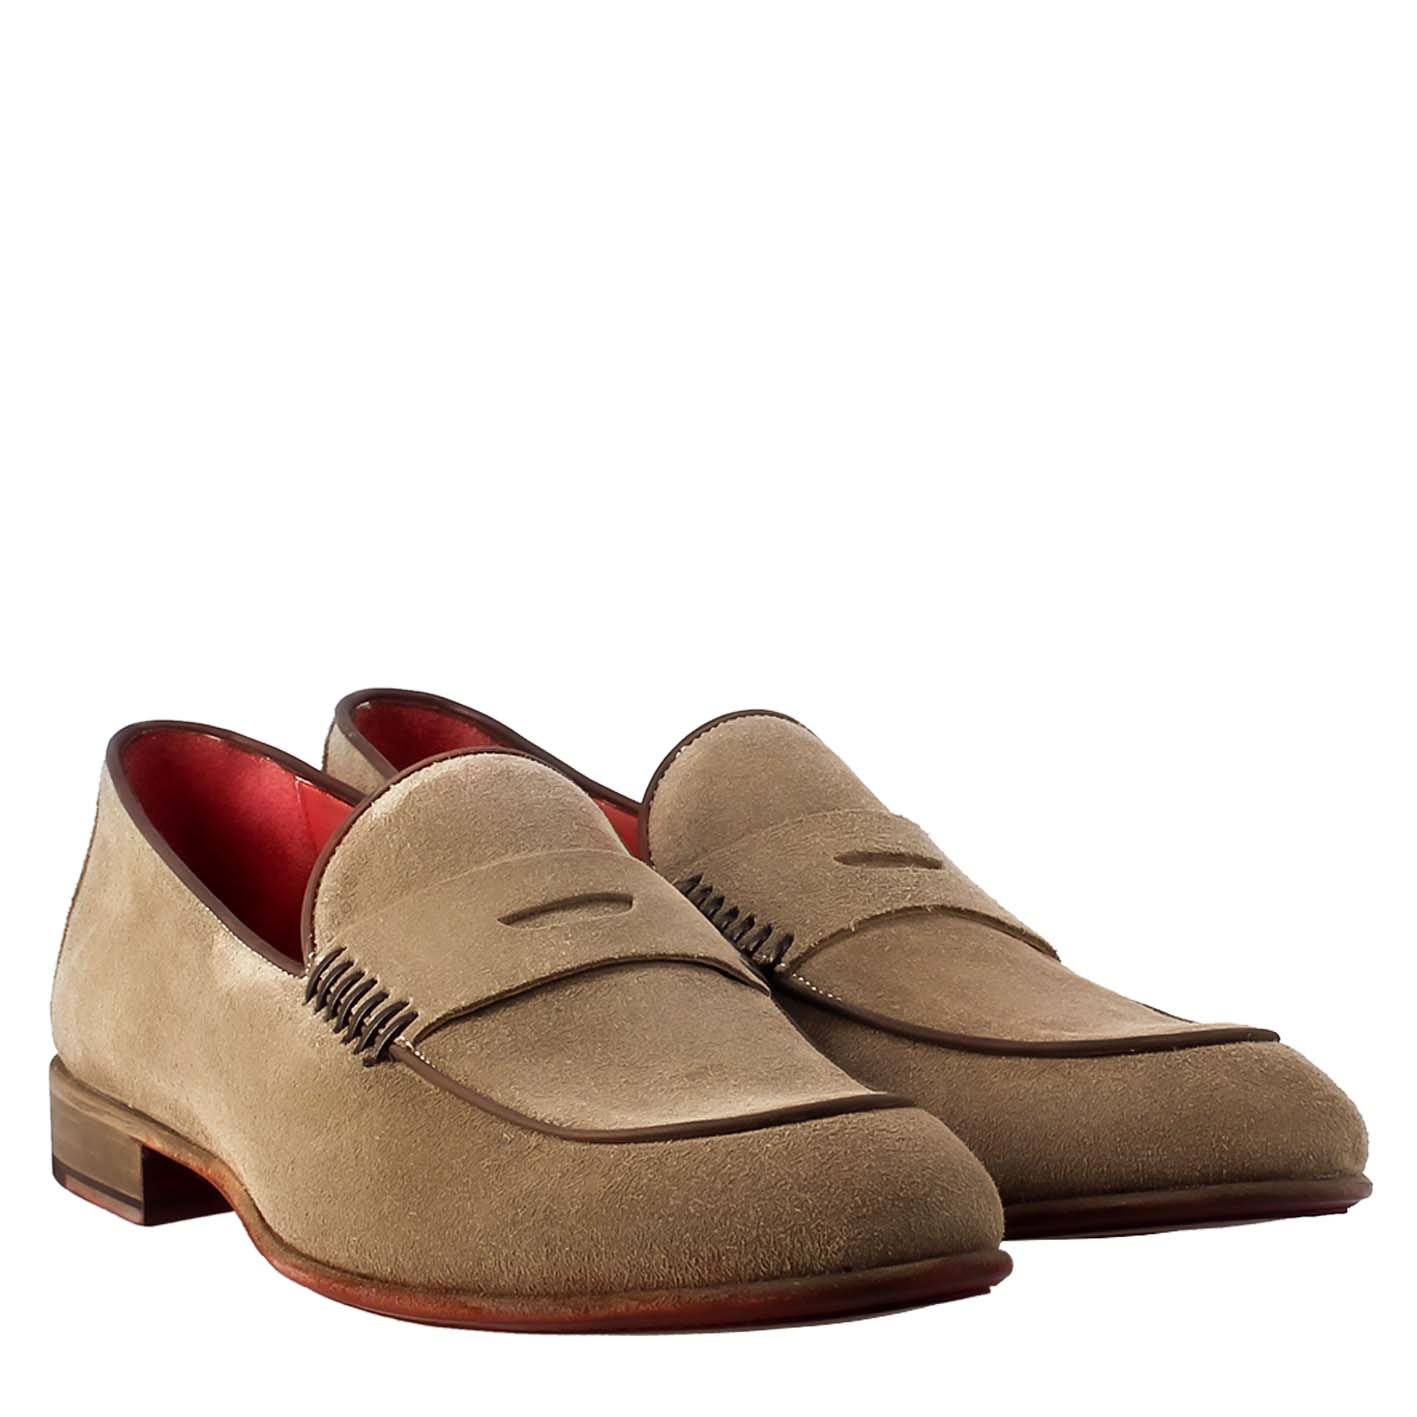 Elegant gray men's moccasin in suede leather